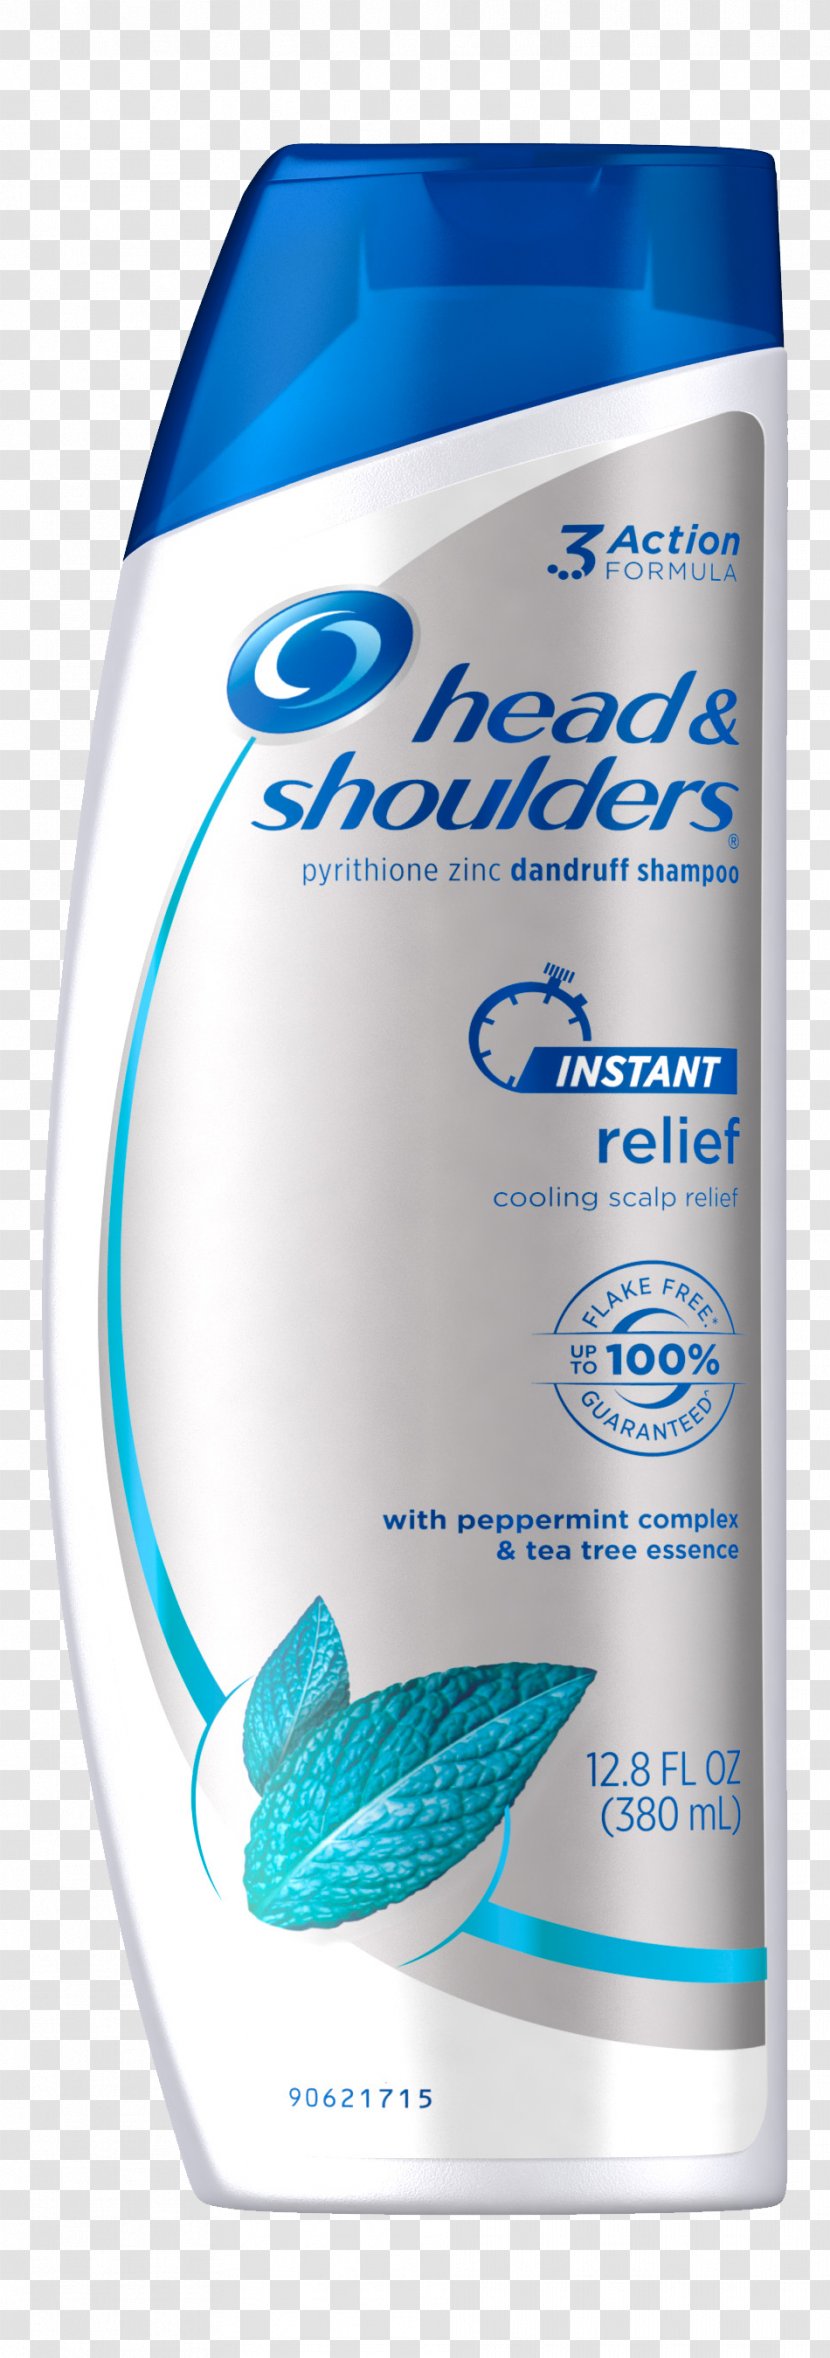 Head & Shoulders Shampoo Dandruff Hair Conditioner - Lotion Transparent PNG